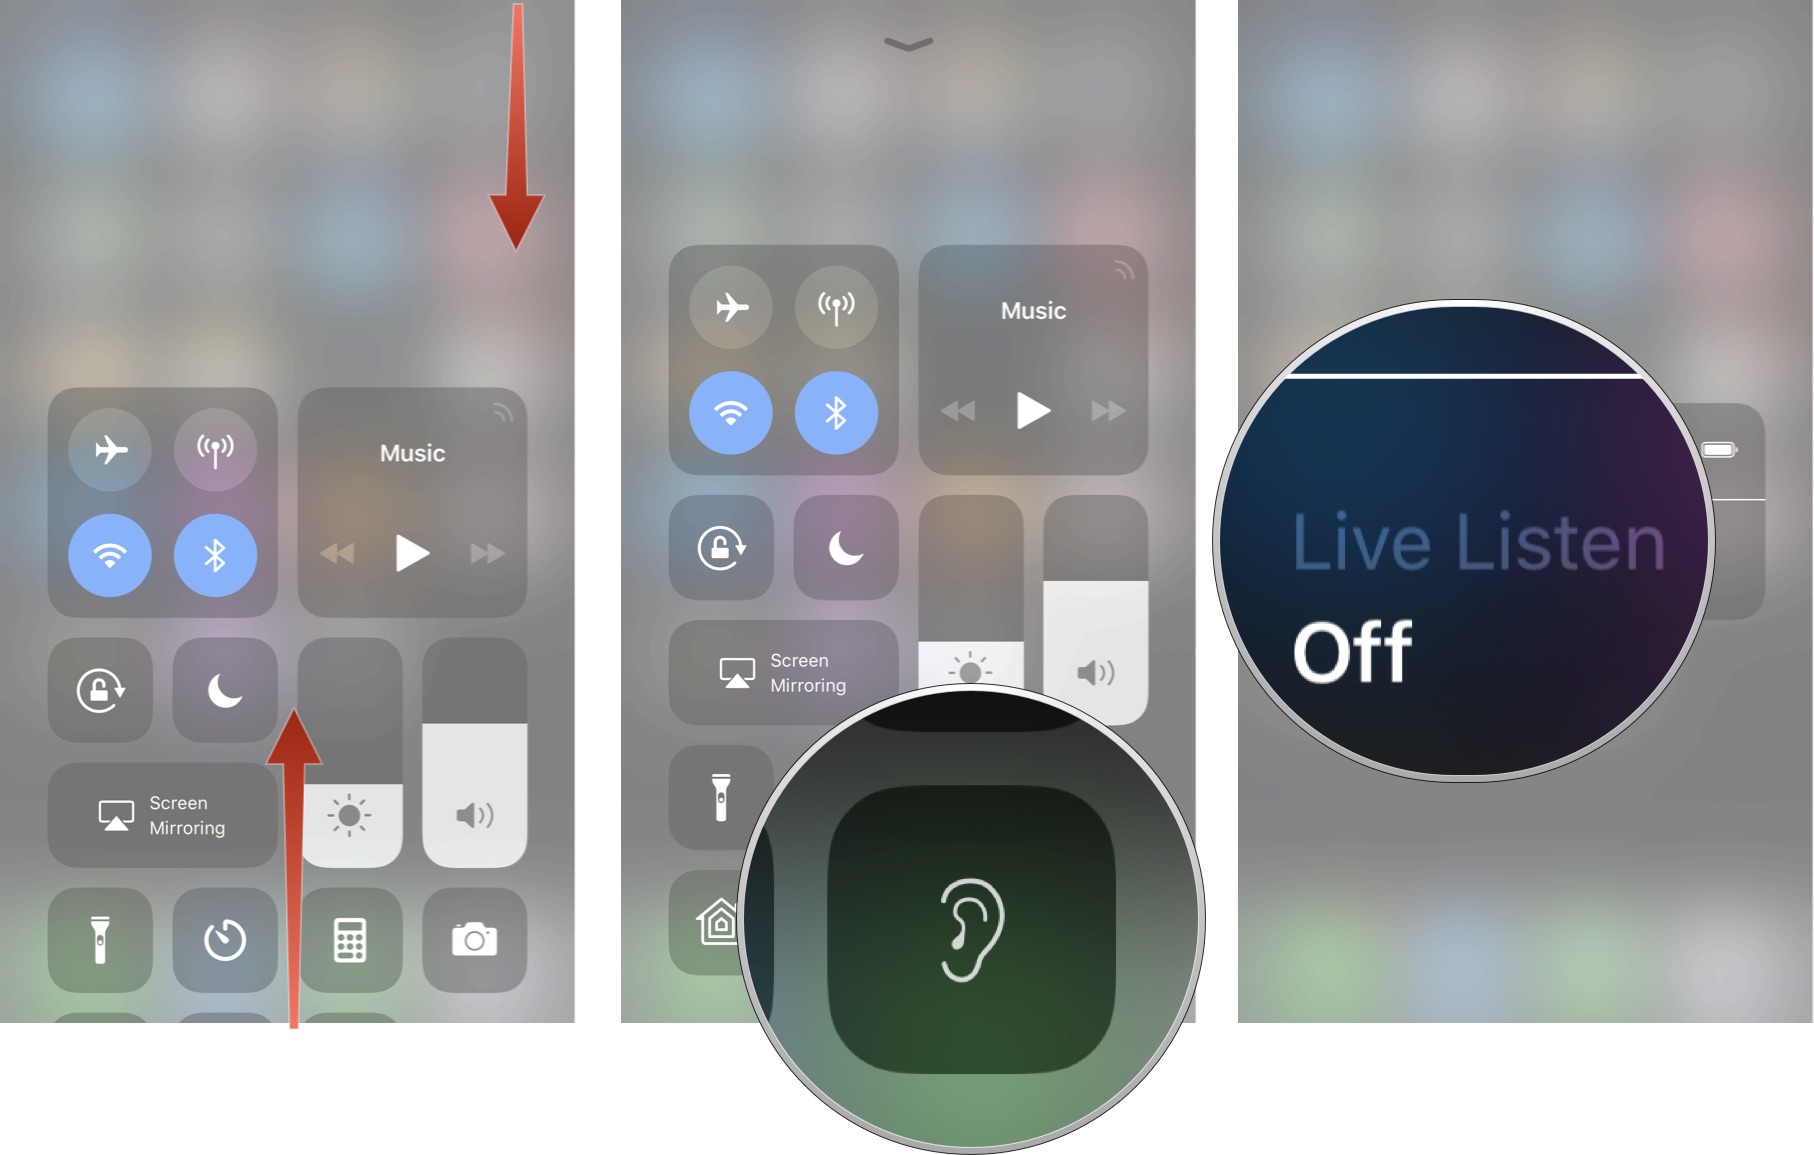 Launch Control Center, then tap the Live Listen icon, then tap Live Listen to turn it on